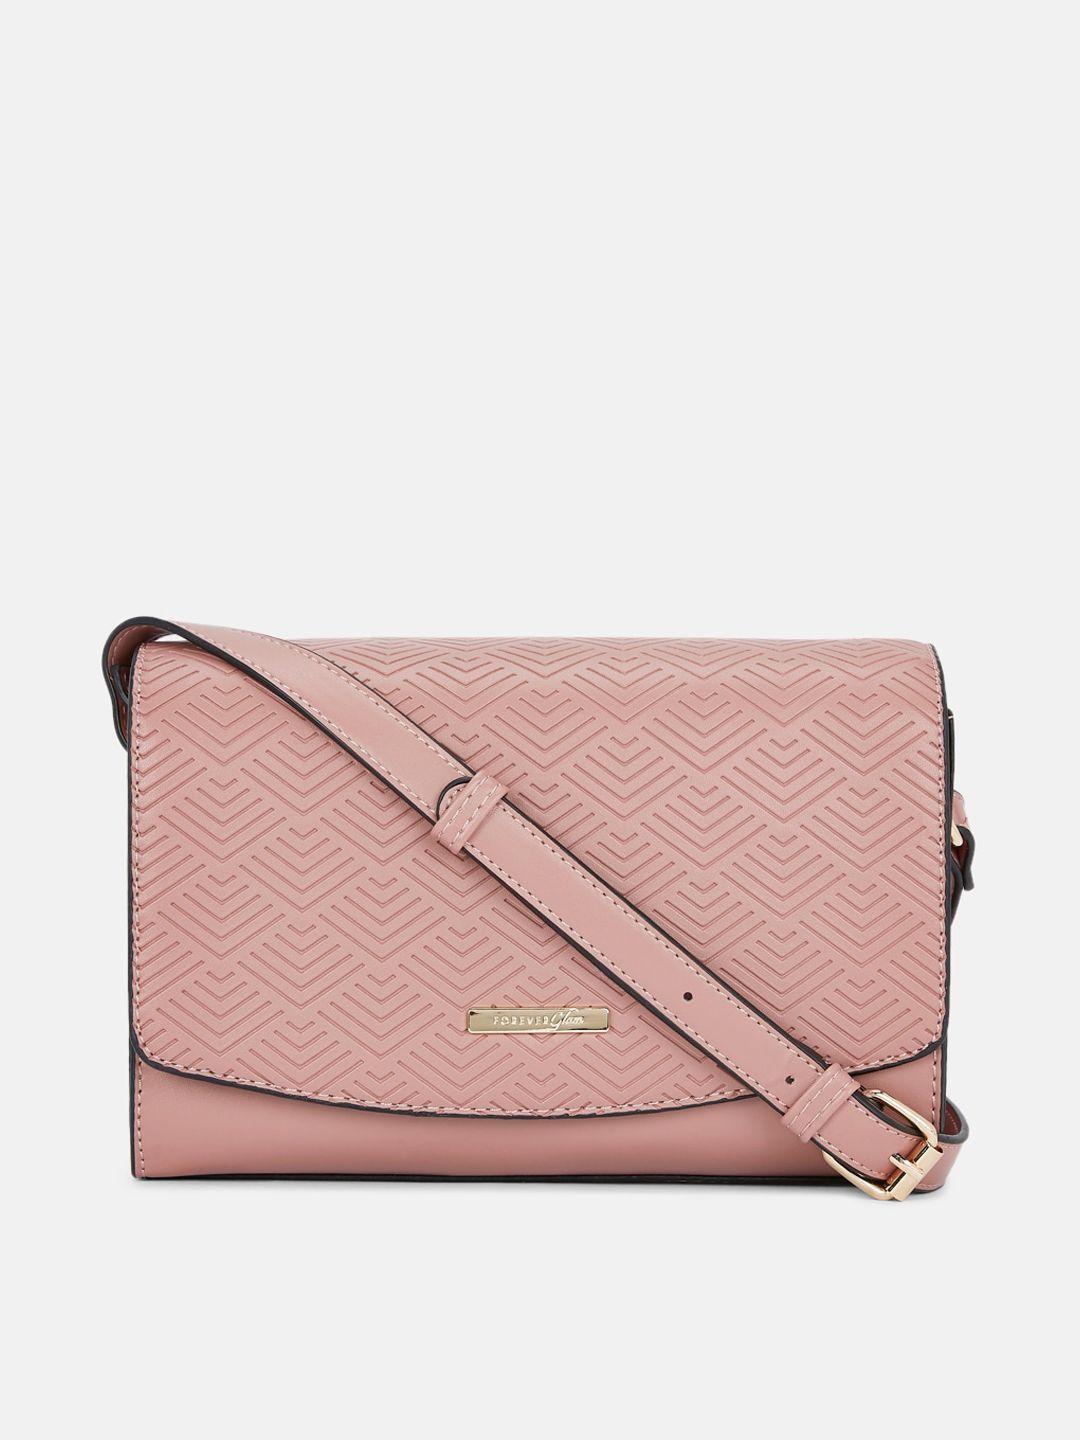 forever glam by pantaloons pink textured structured sling bag with quilted